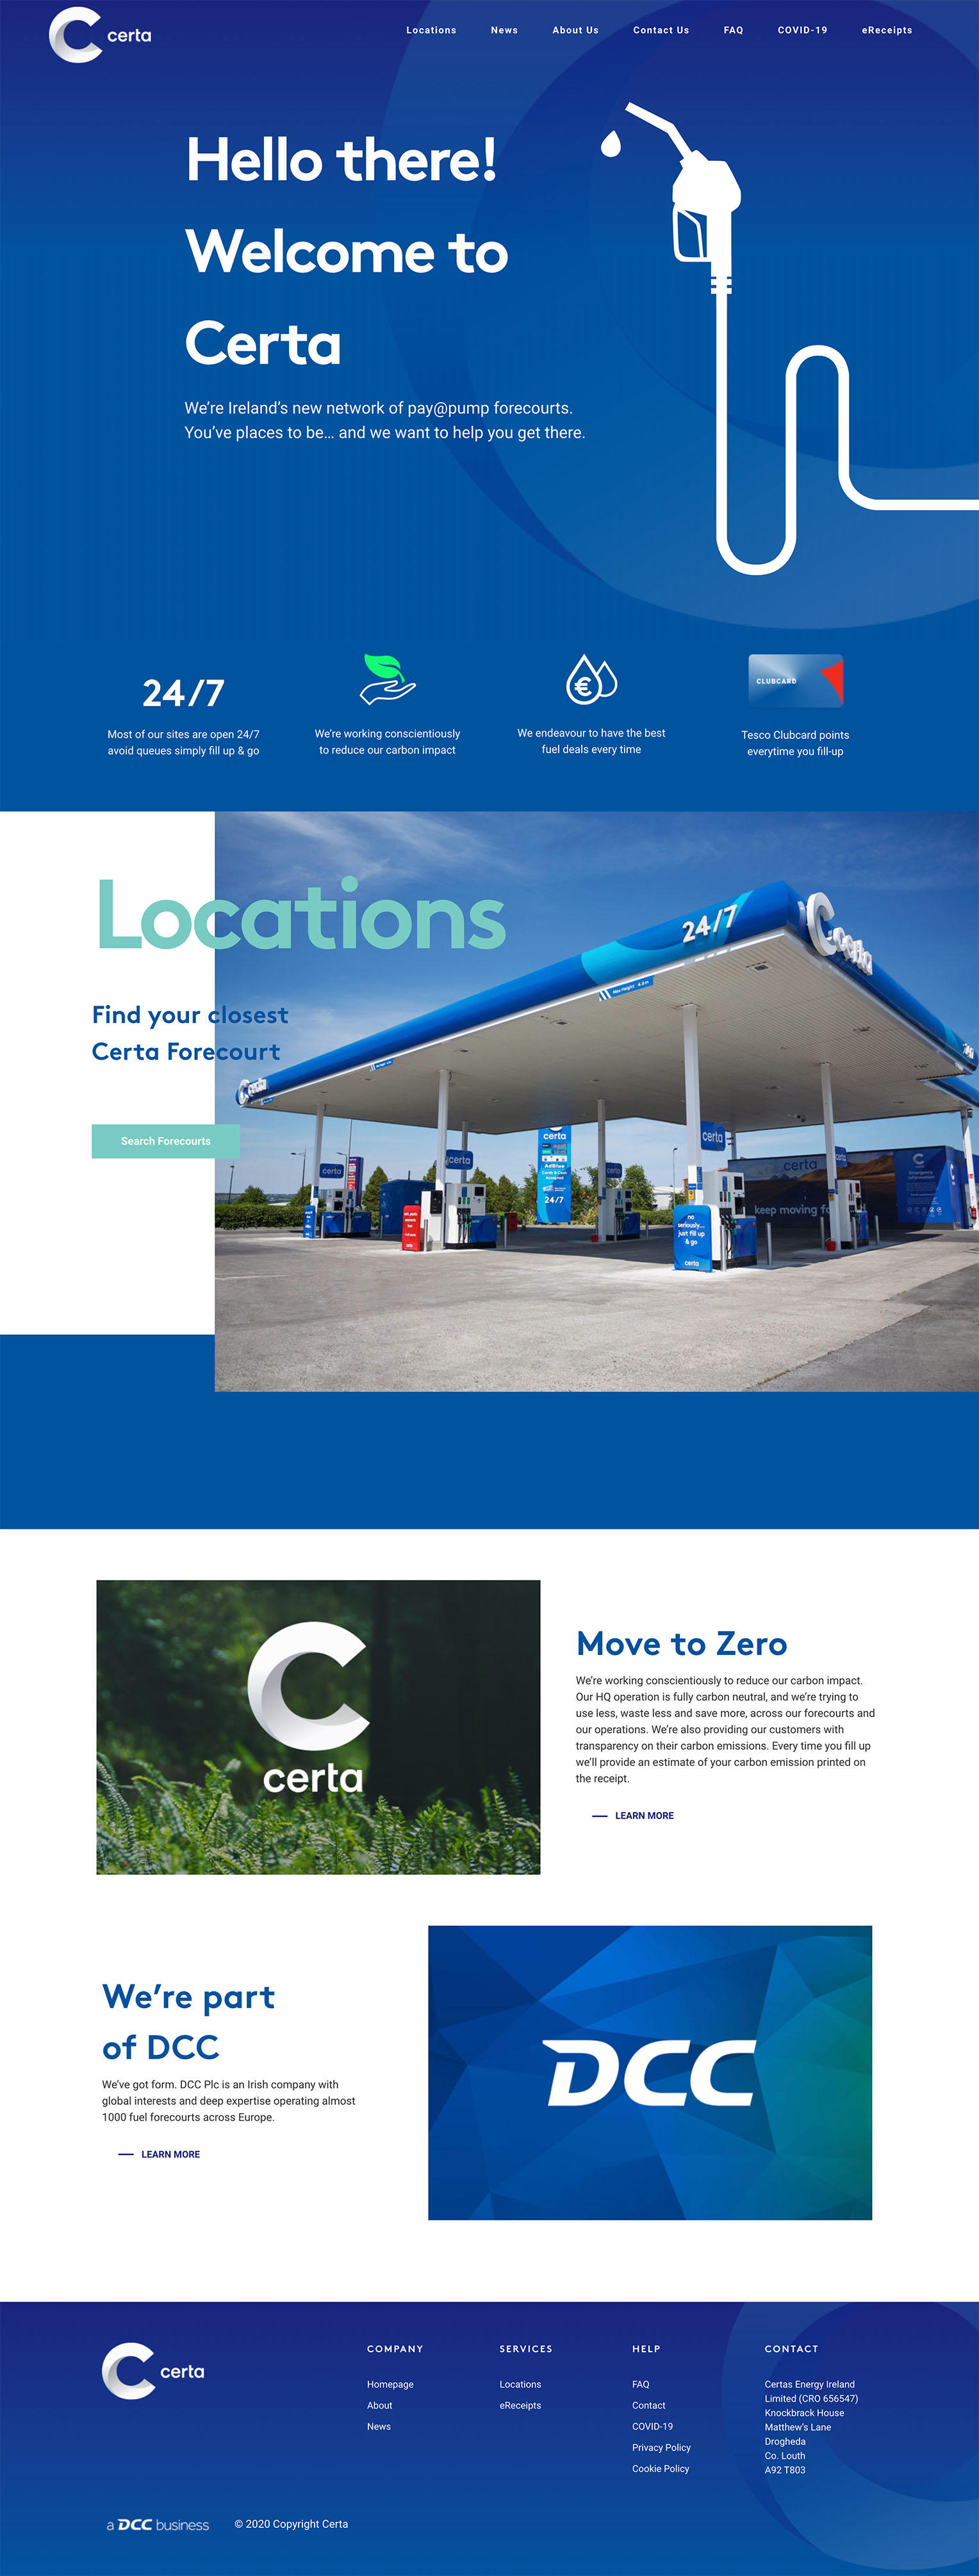 Certa fuel homepage, call to action for their station locations and about their sustainability